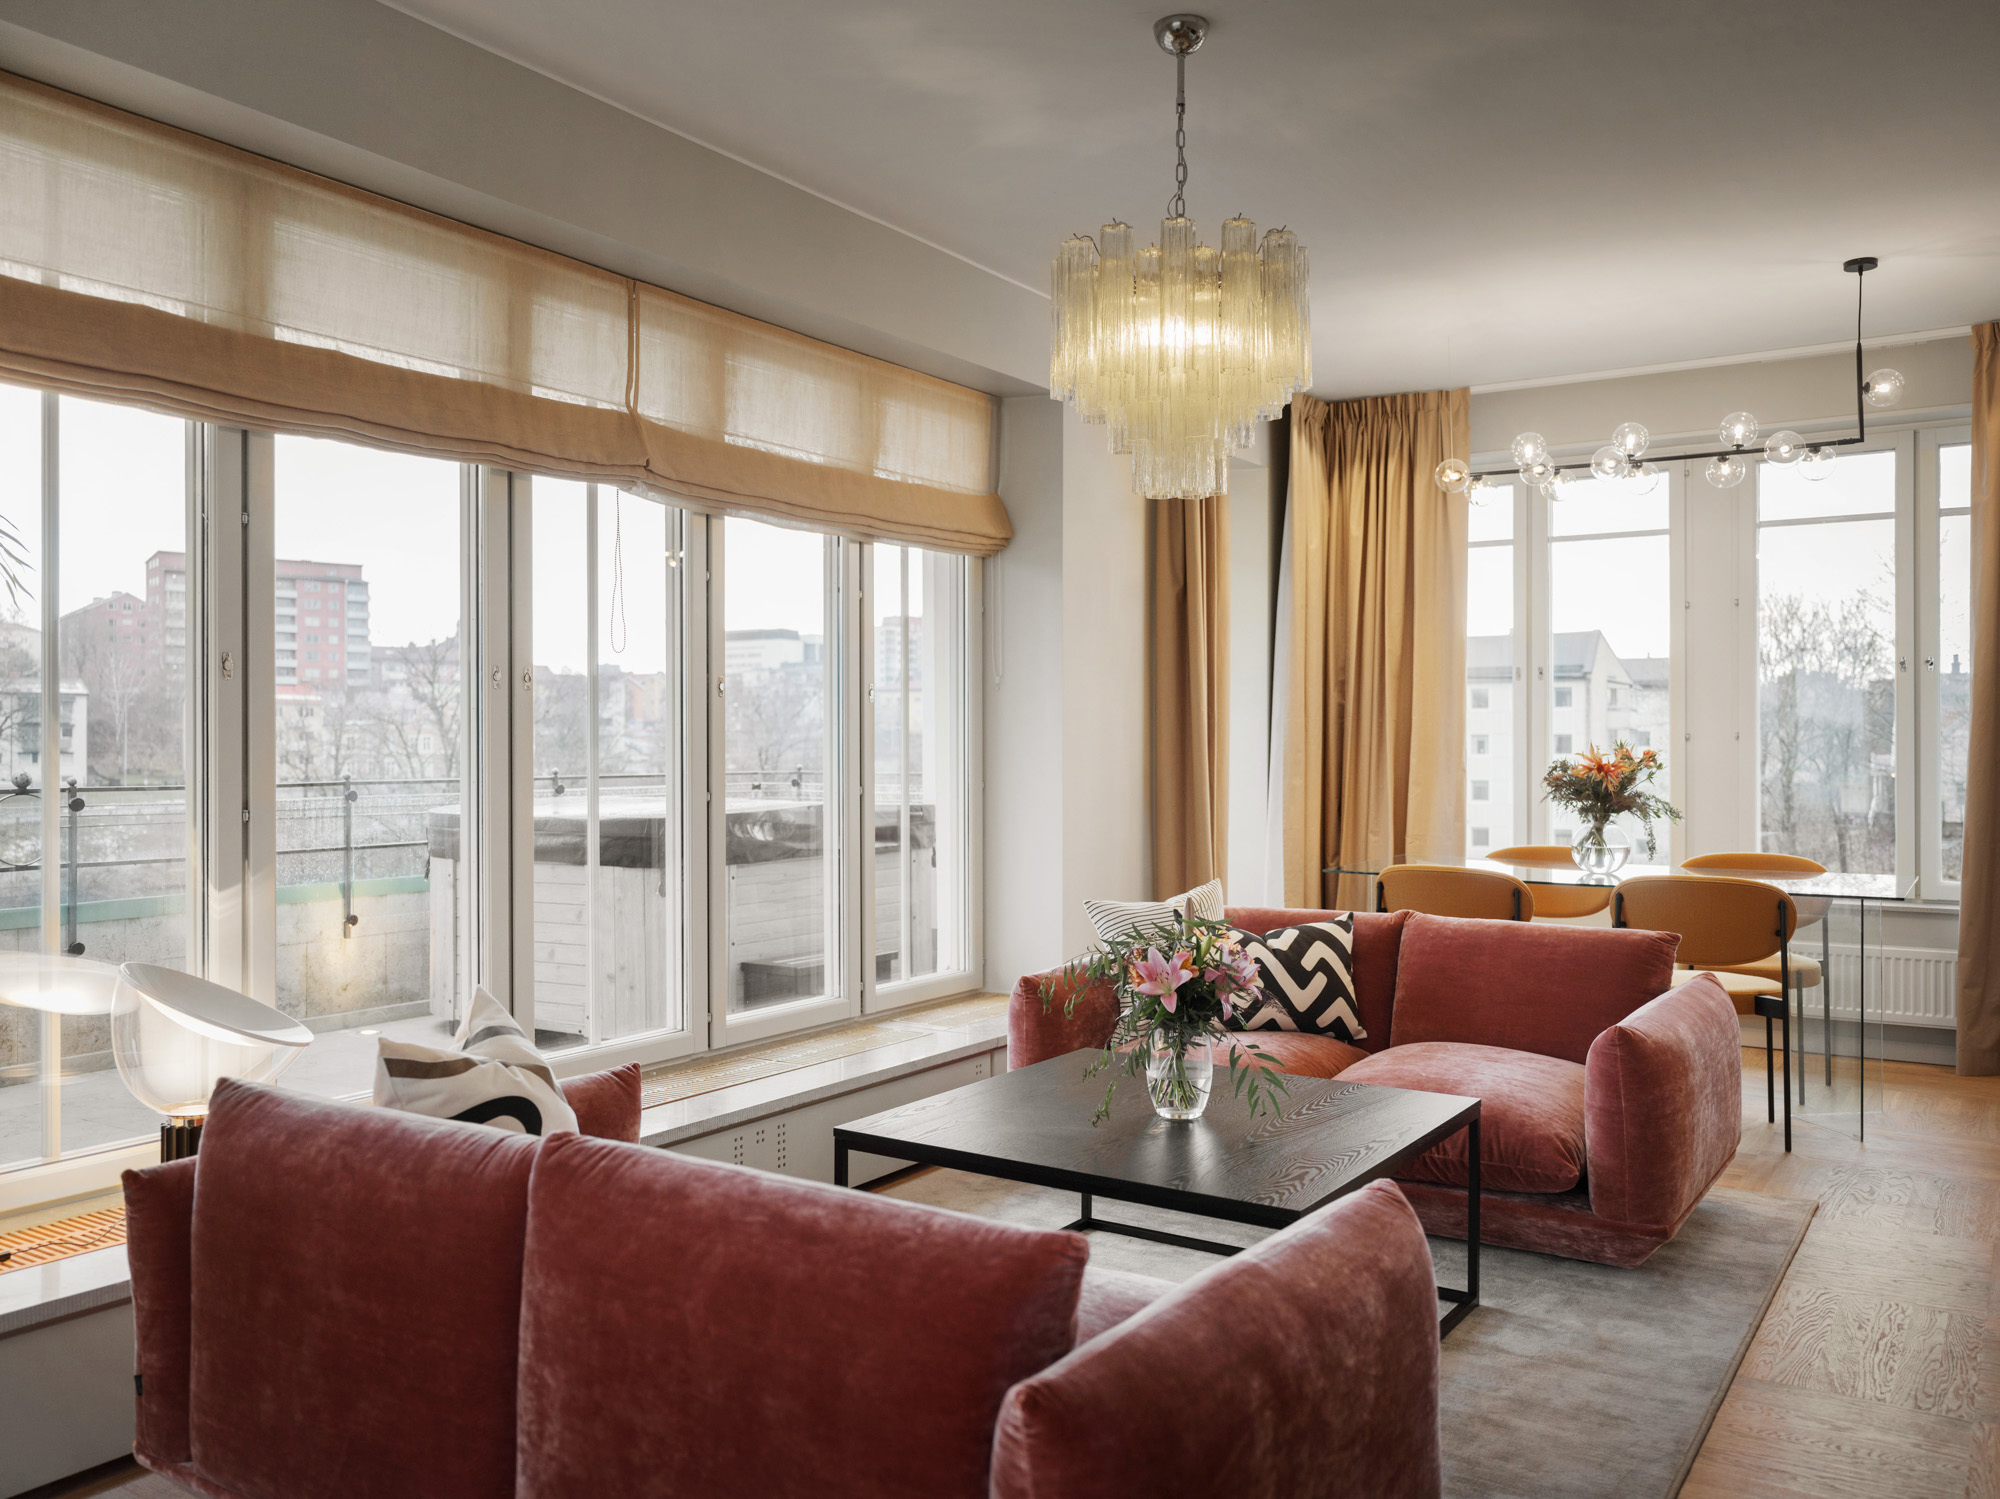 Cozy suite with sofa group, dining group and windows along the walls